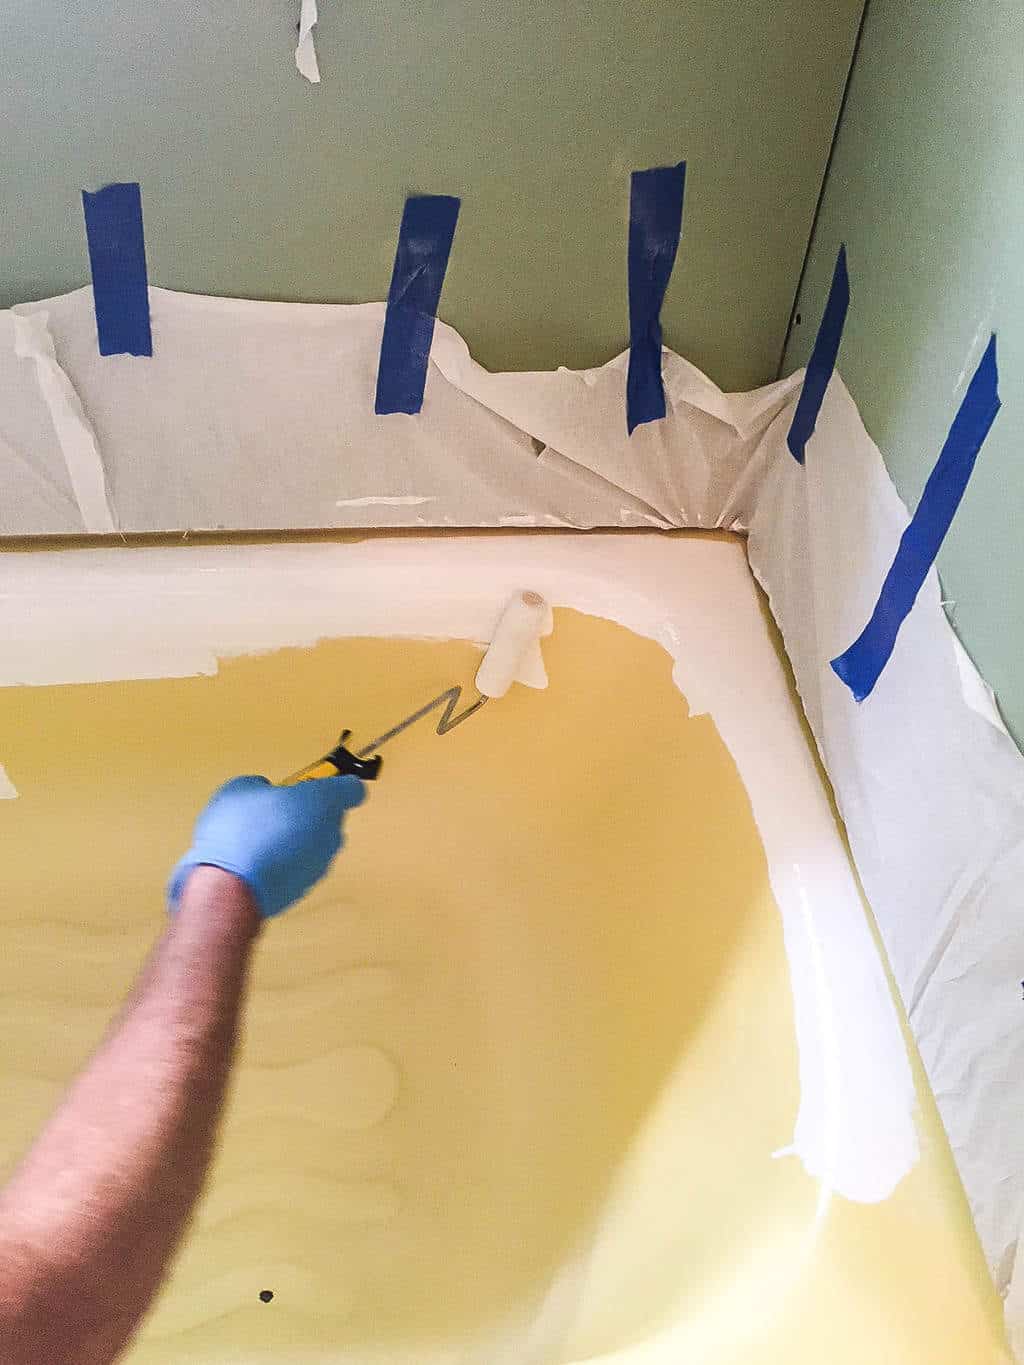 How To Paint A Bathtub Easily, Is There A Spray Paint For Bathtubs